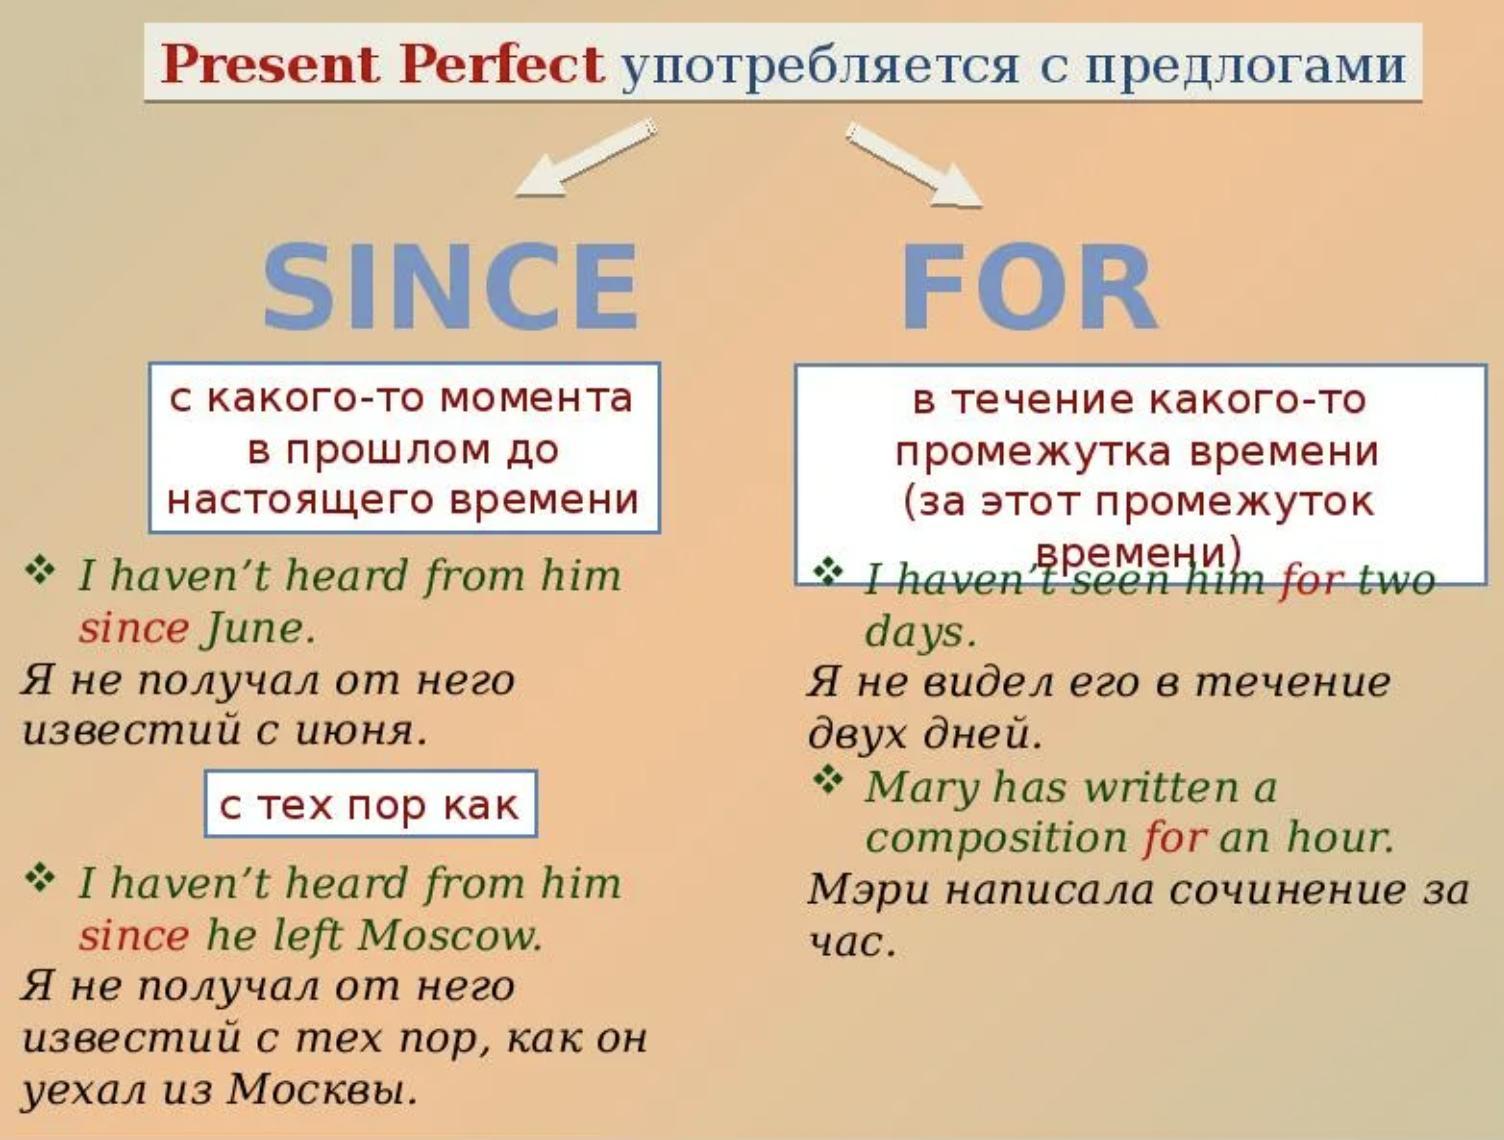 Yet since present perfect. Present perfect since for правило. Употребление since и for в present perfect. Since for present perfect. Present perfect предлоги.